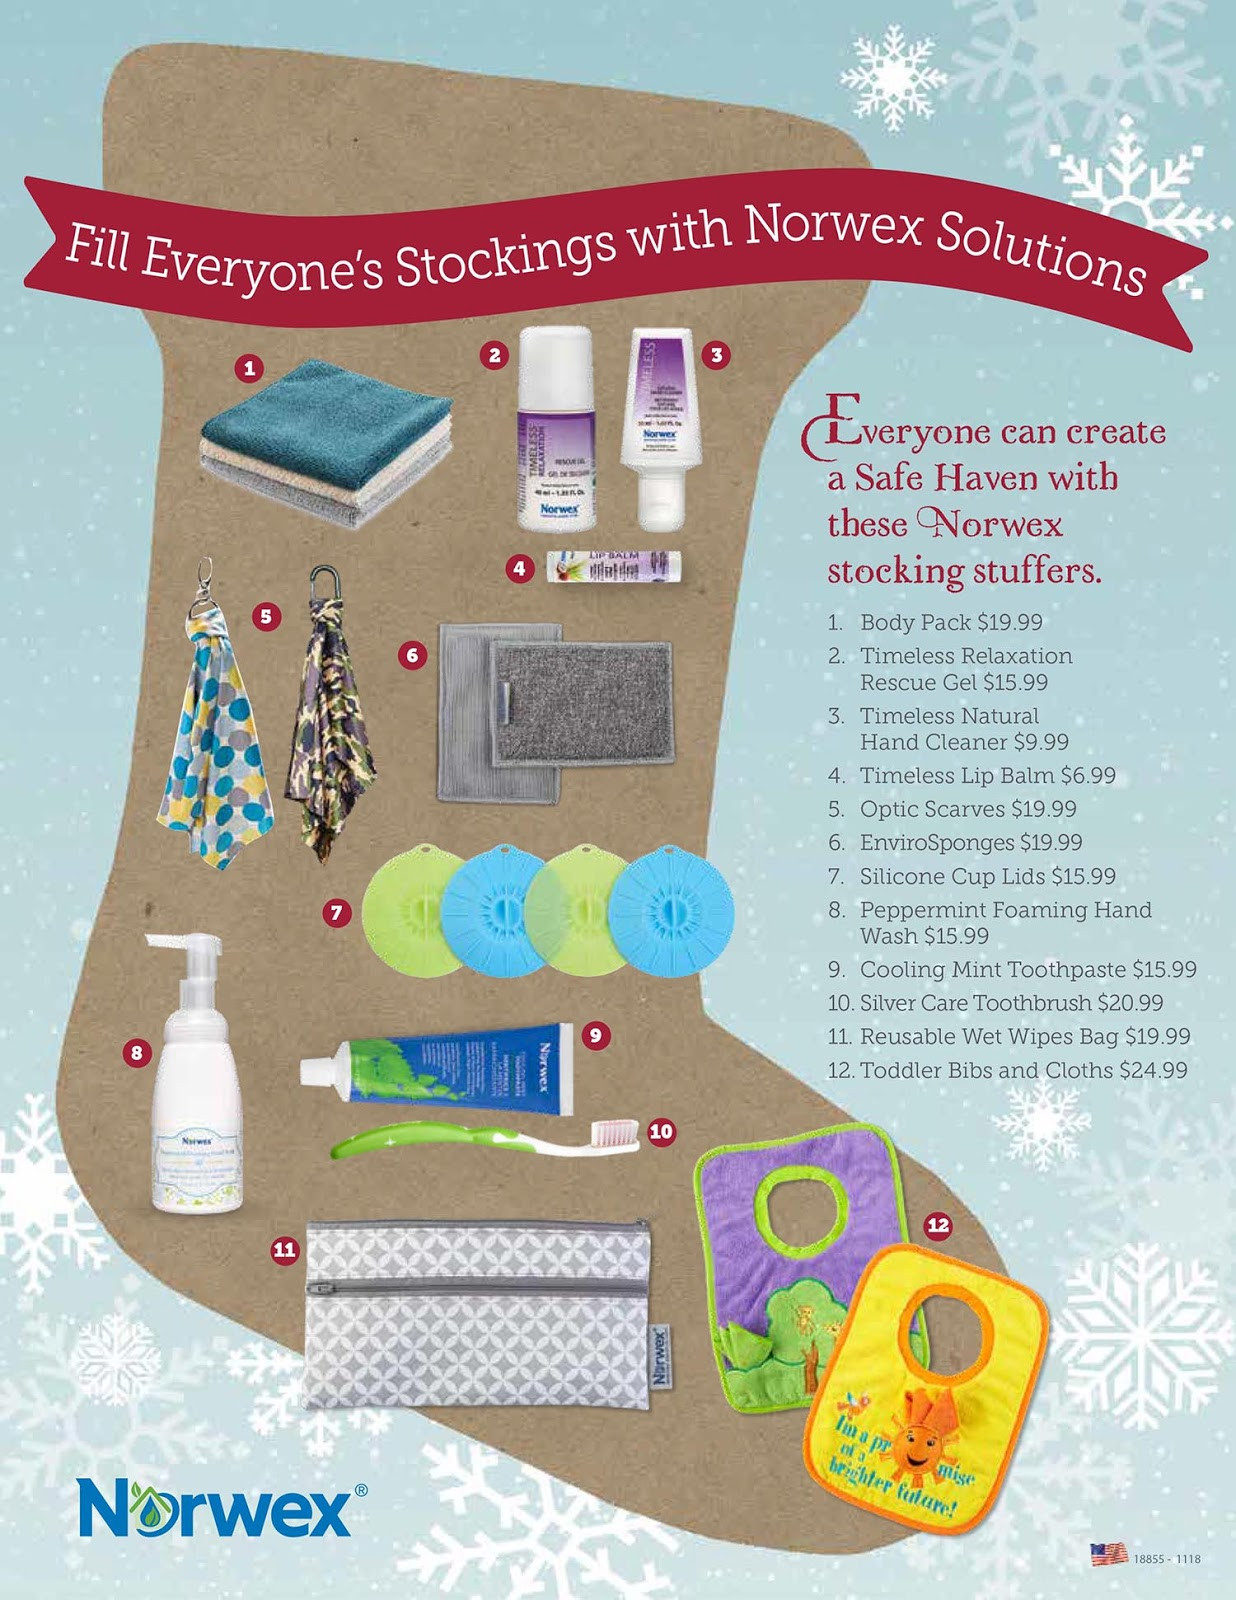 Norwex Holiday Gift Ideas
 Rebecca Lange Norwex Independent Sales Consultant